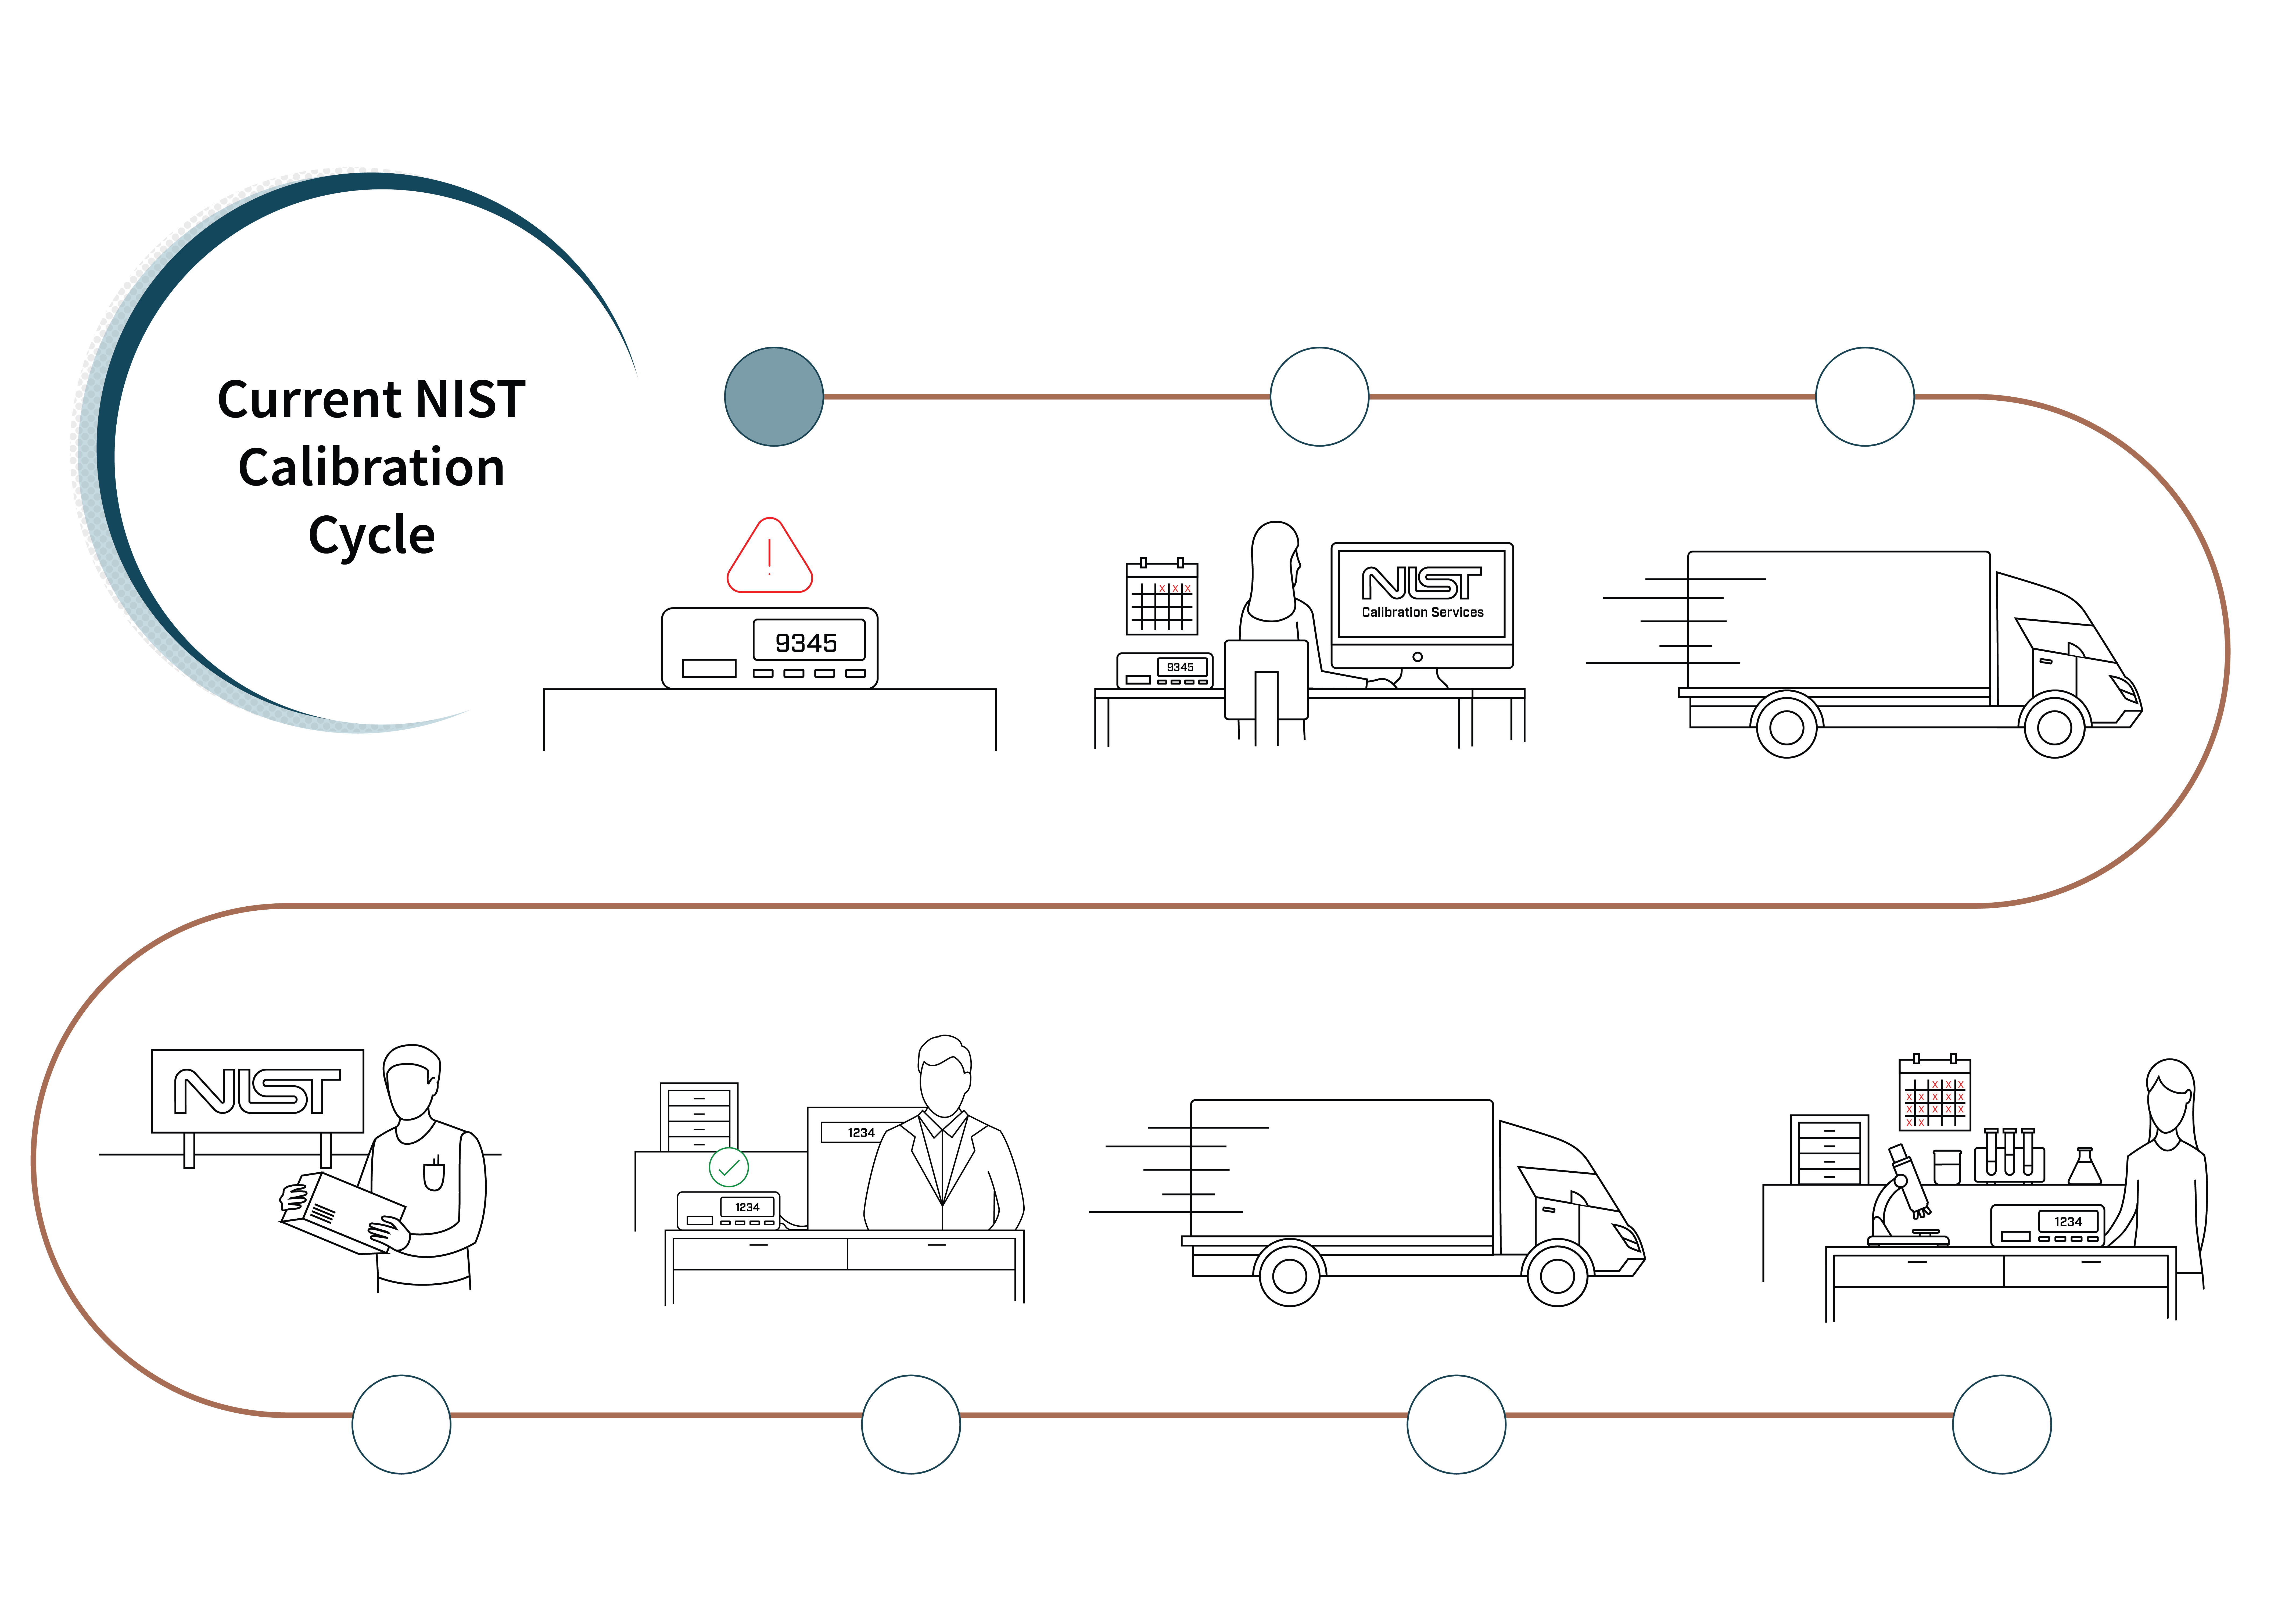 Infographic shows steps from instrument in lab being sent to NIST for calibration and returning to the lab.